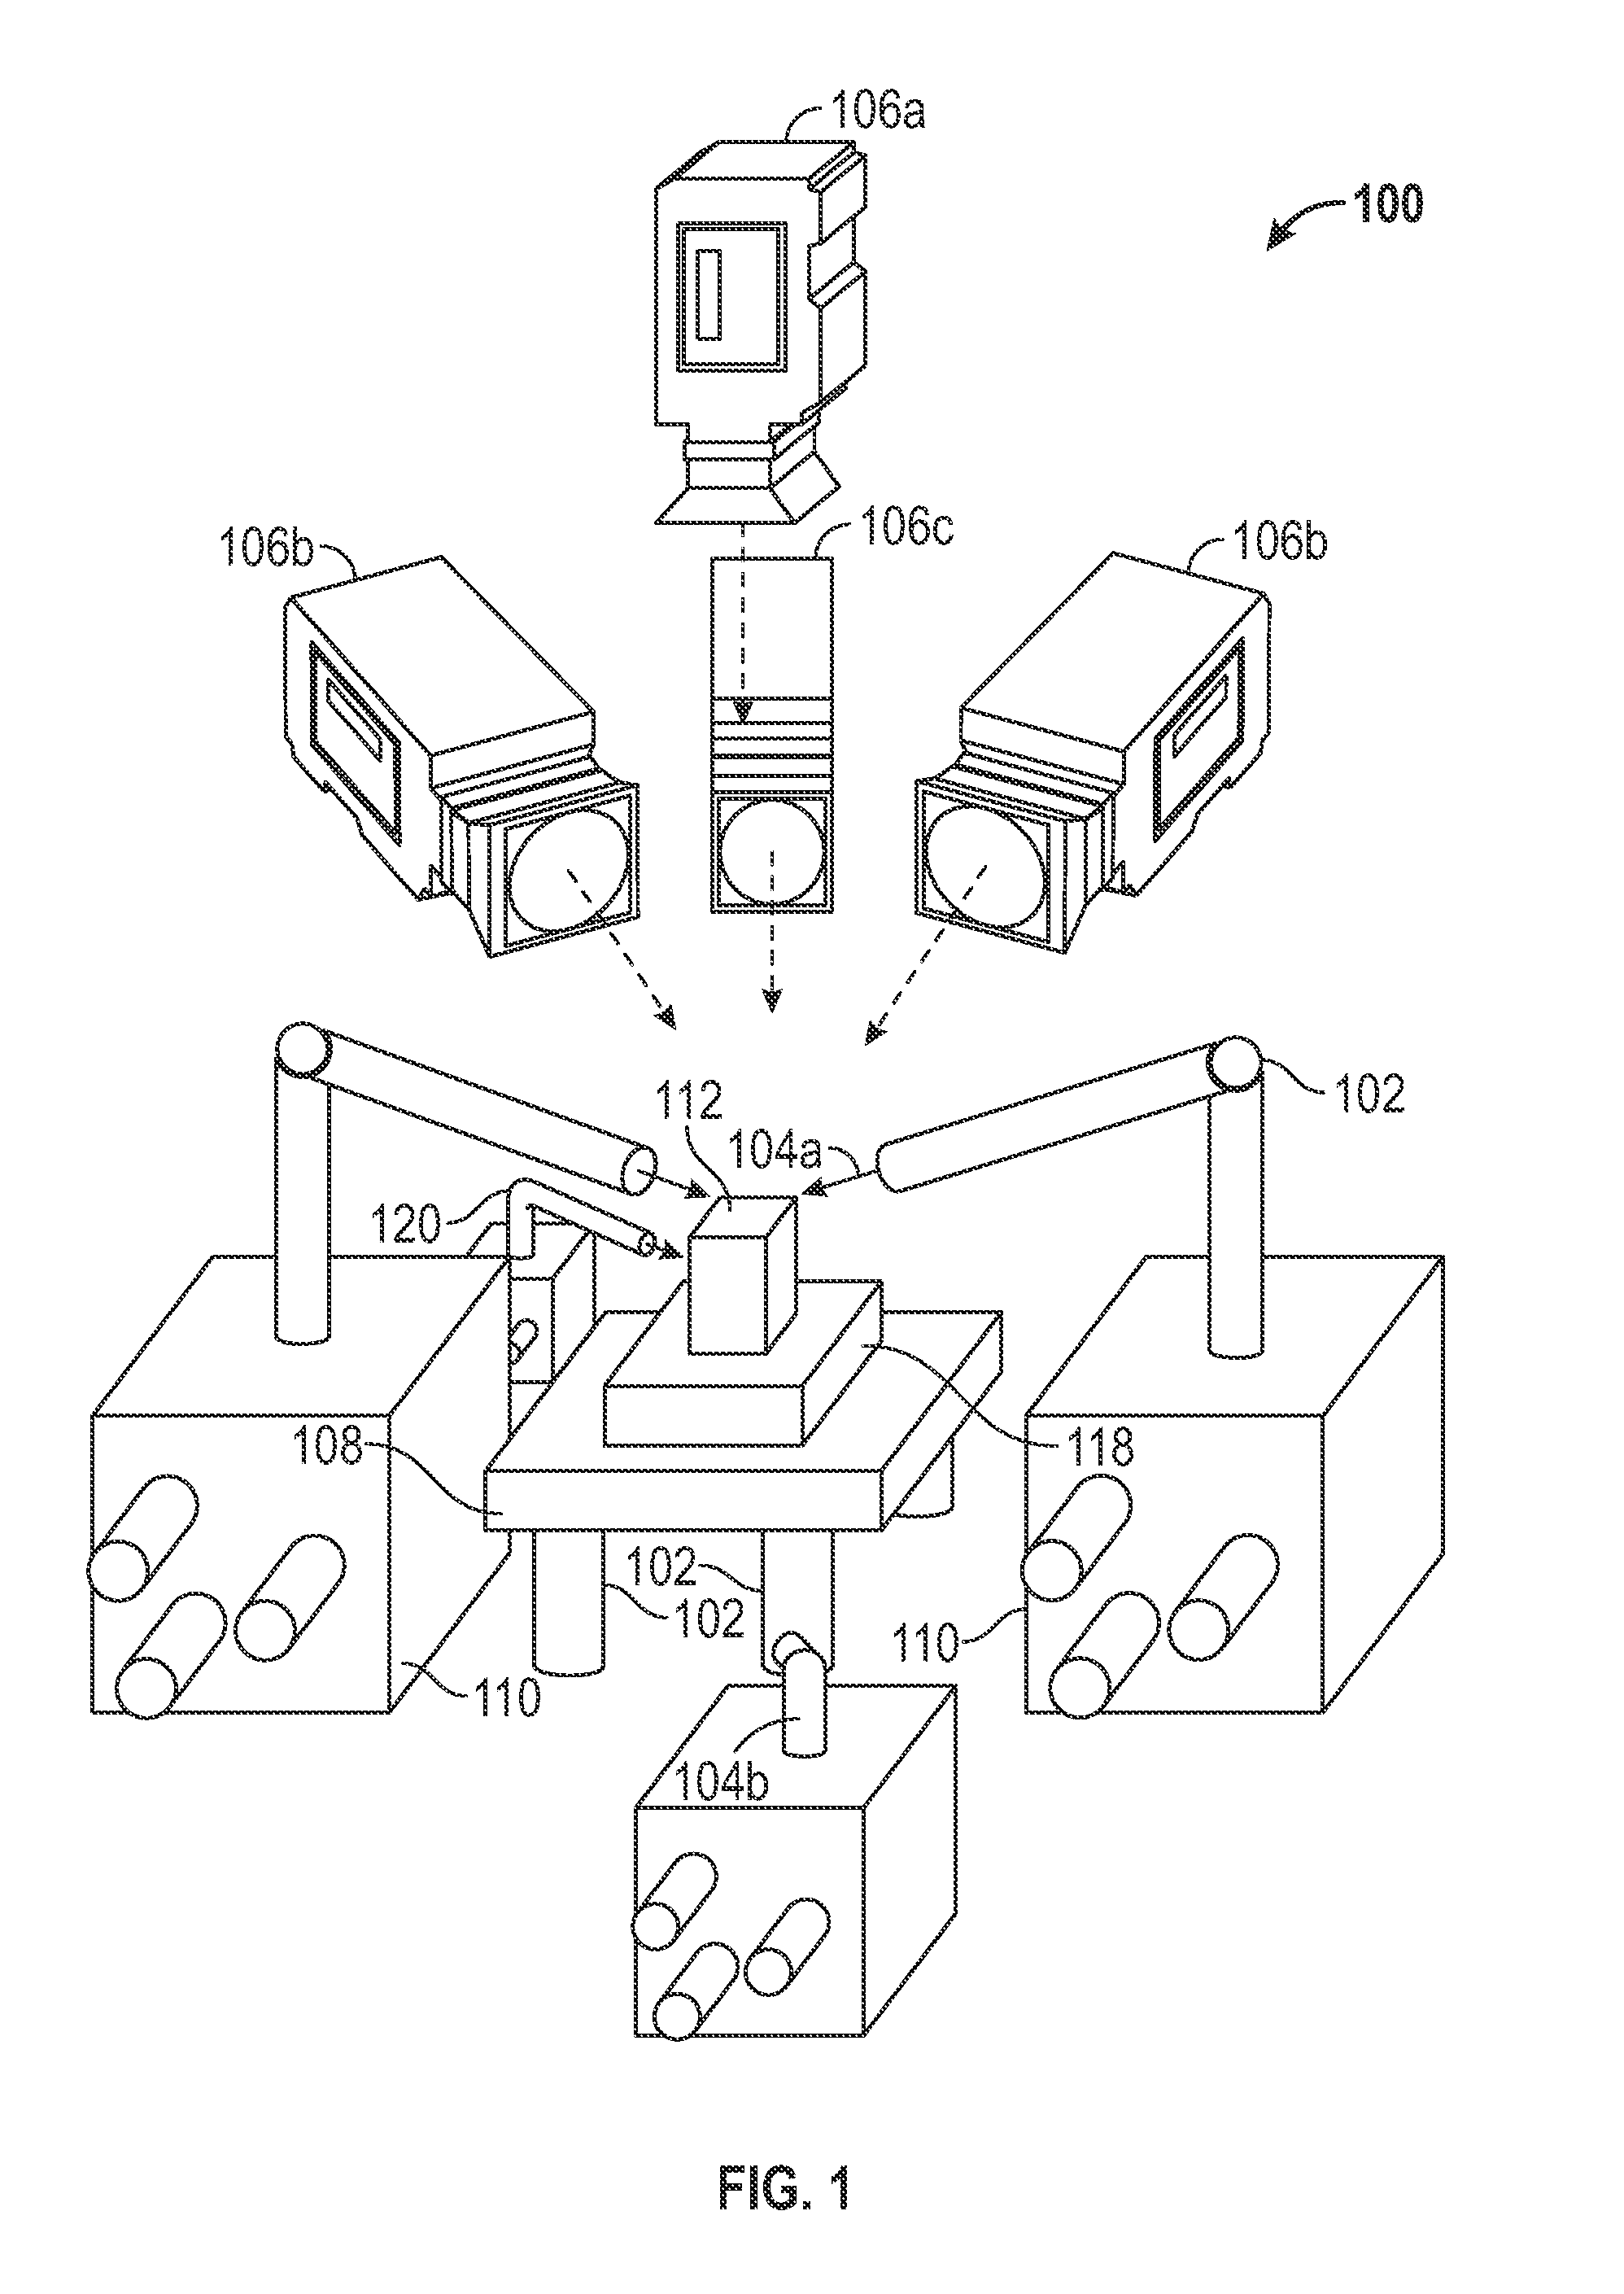 System and method for probe-based high precision spatial orientation control and assembly of parts for microassembly using computer vision